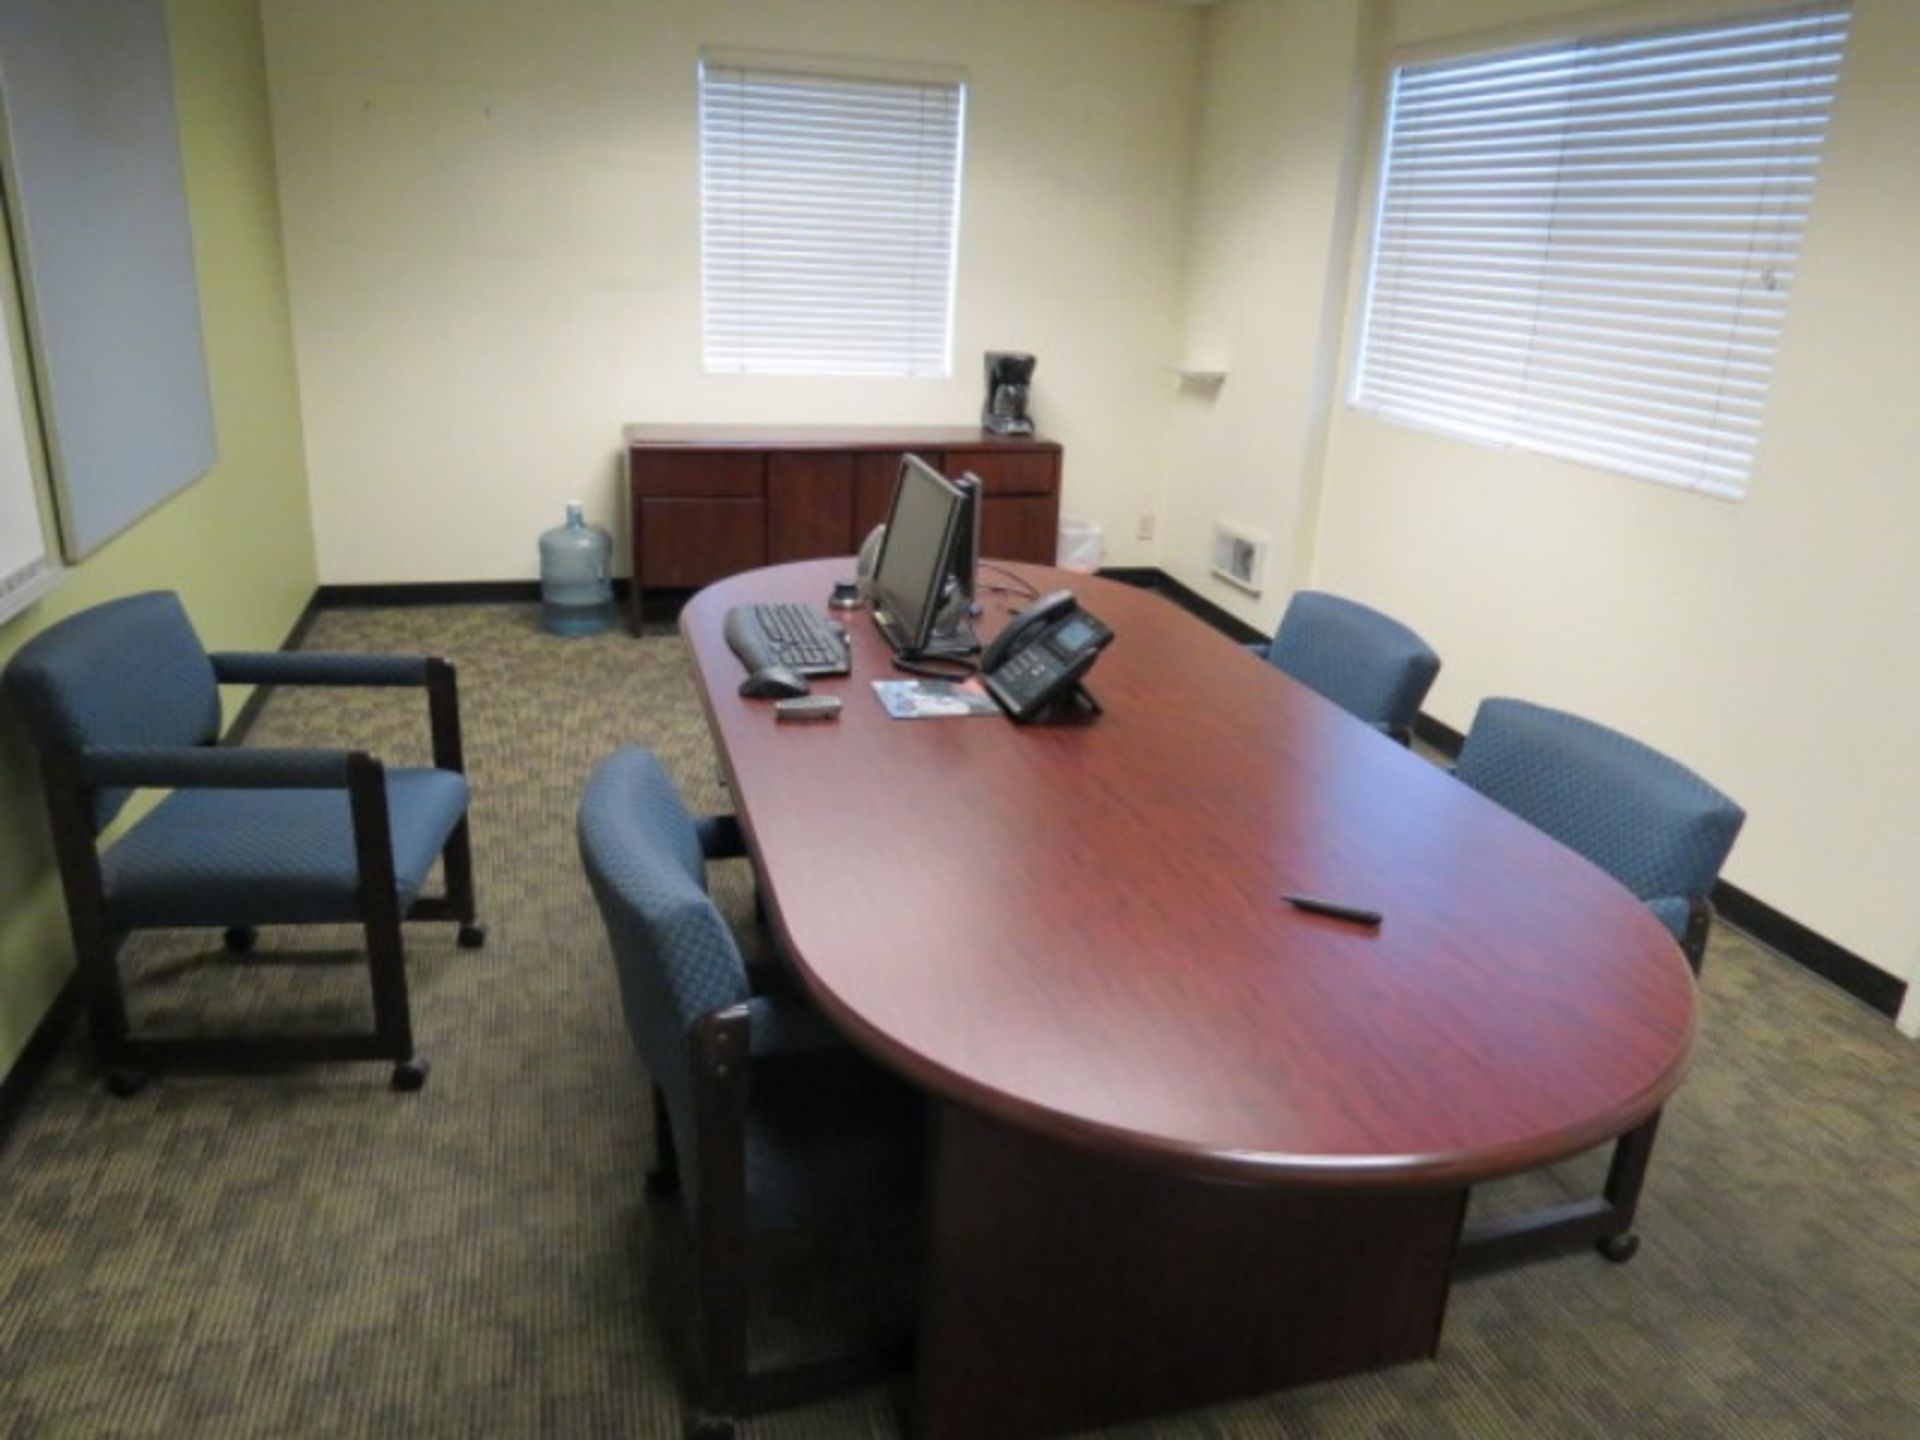 Room Content, Conference Table with Chairs & Projector - Image 5 of 9